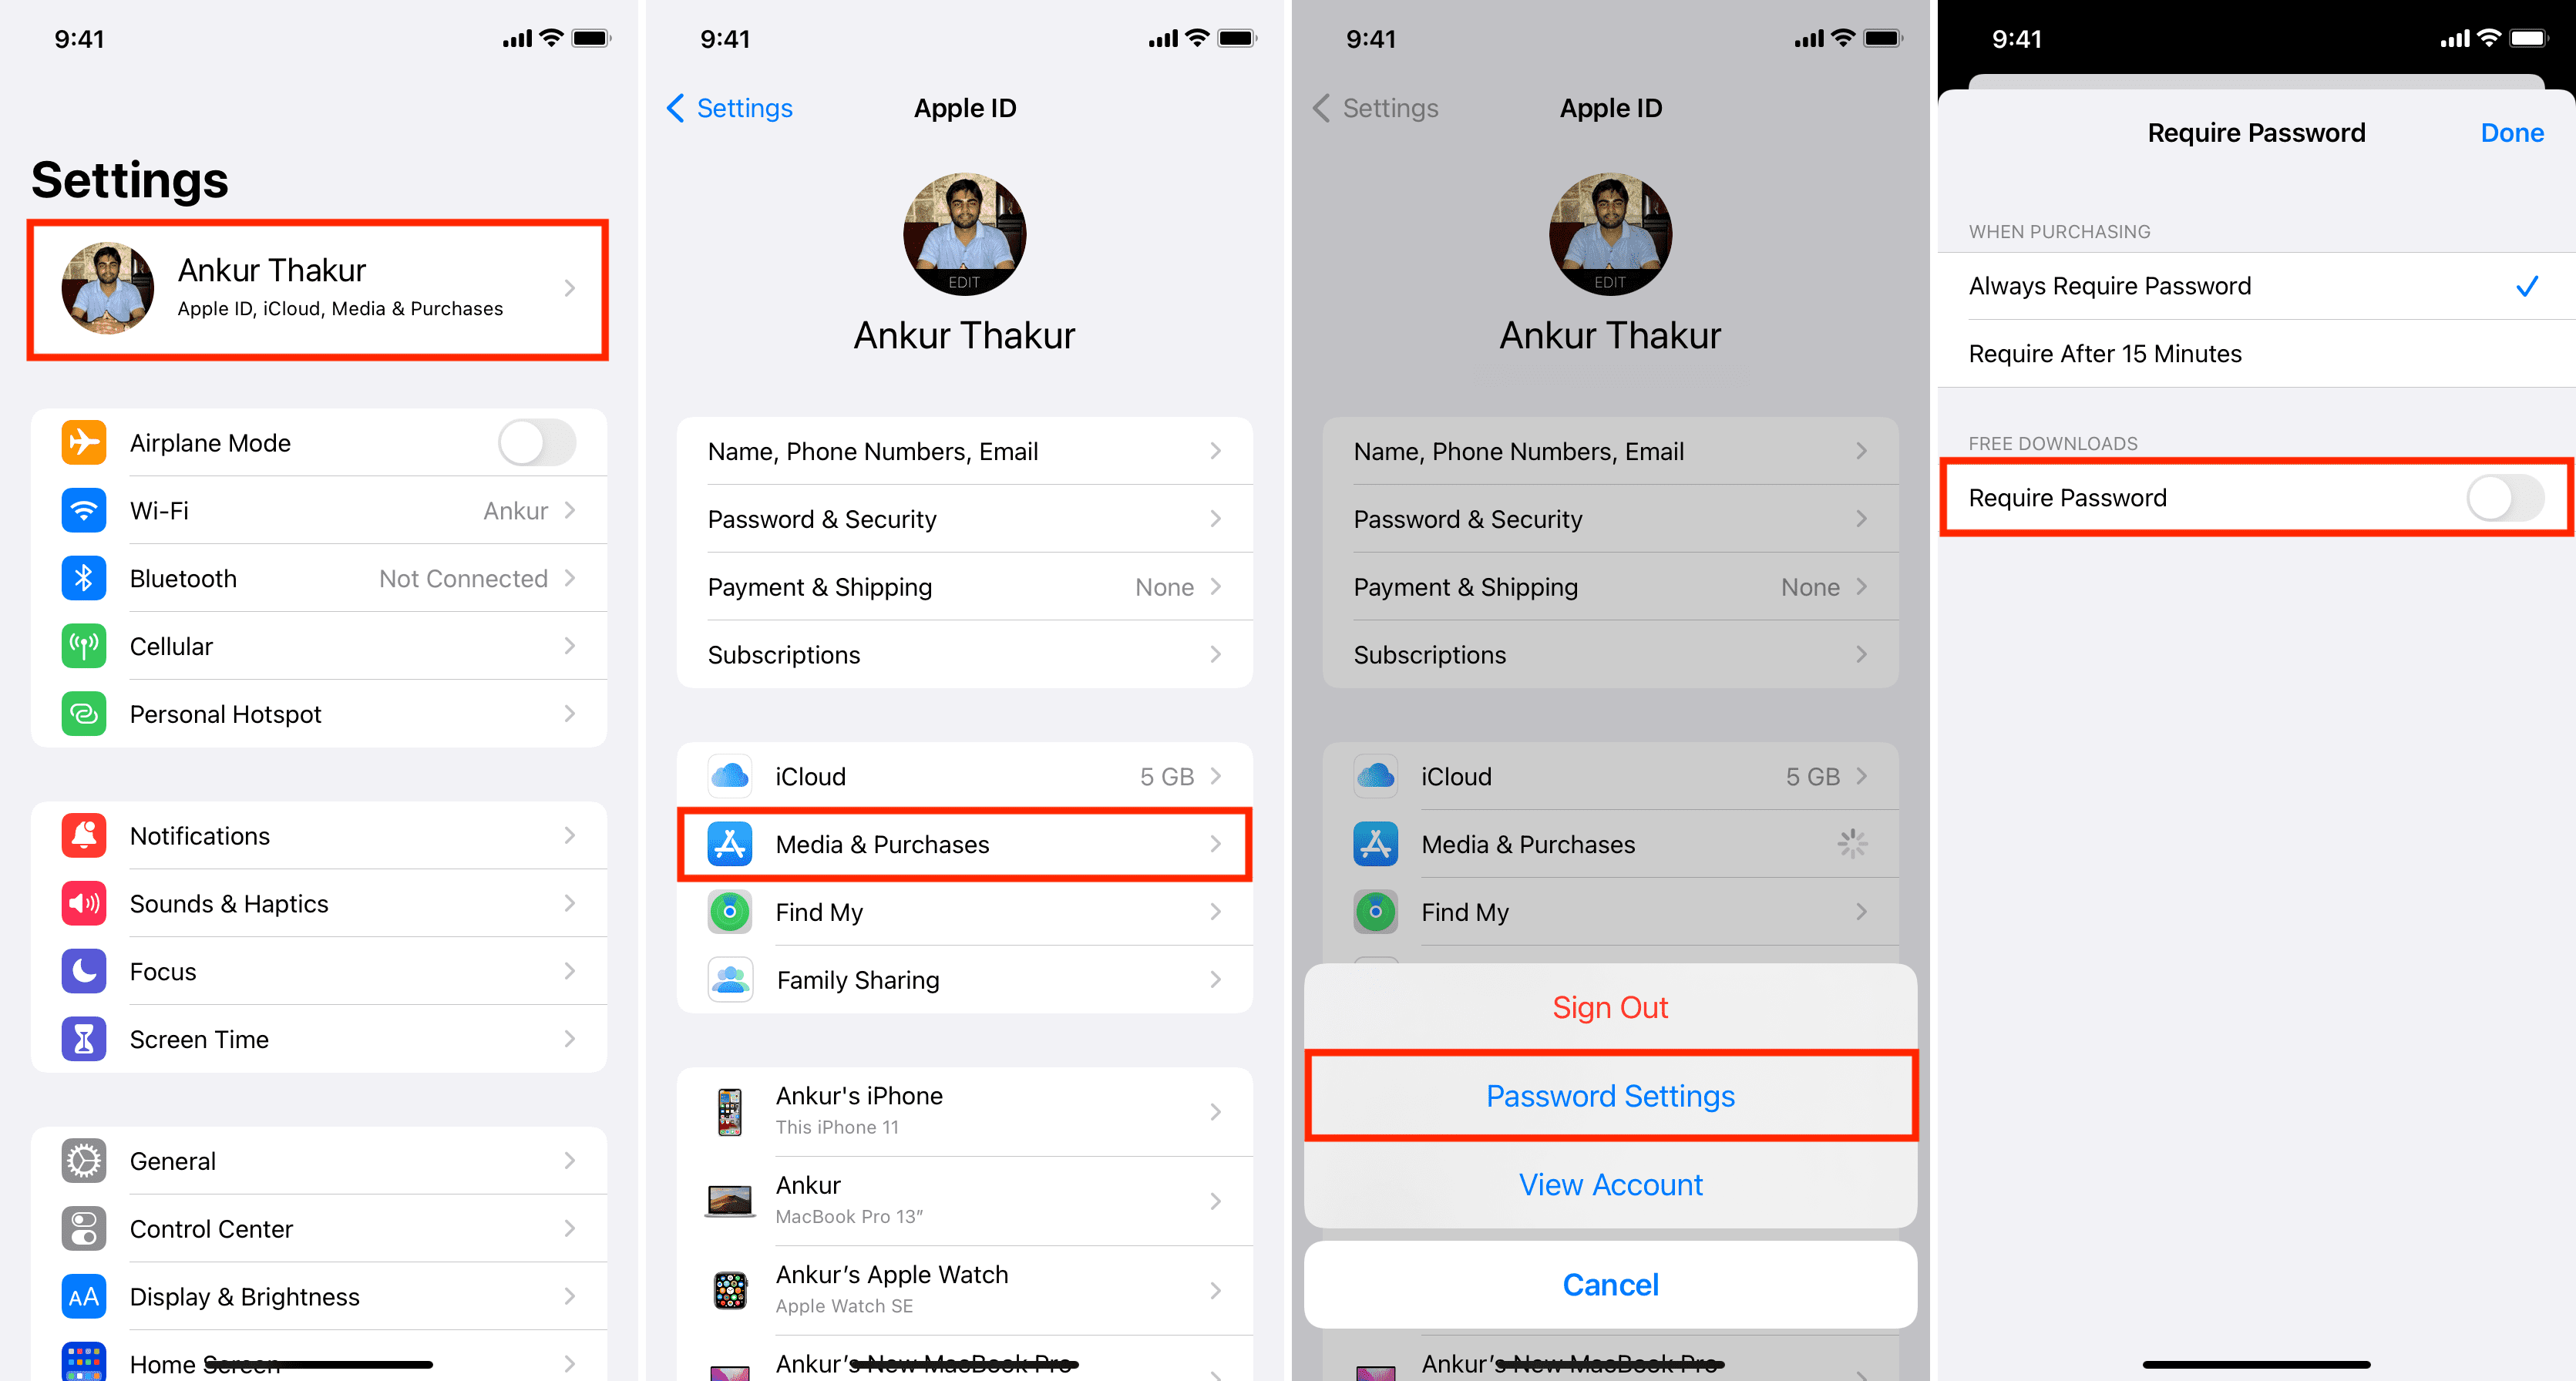 Require Password in Password Settings on iPhone